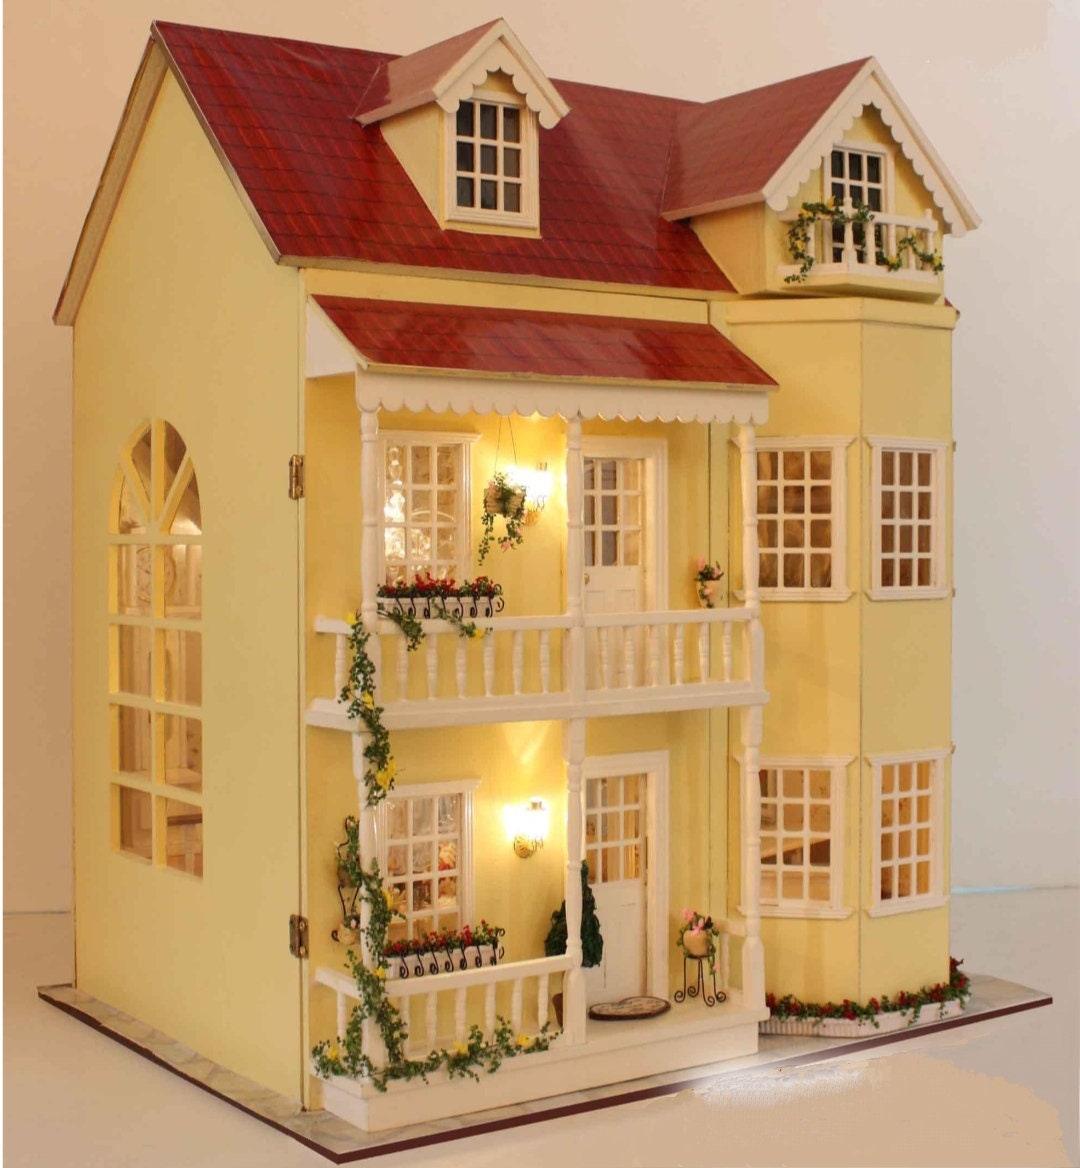 Modern Dollhouse Miniature with Furniture European Style DIY Dollhouse Kit - Openable Doors Room Large Dollhouse Free Musical Movement Box - Rajbharti Crafts